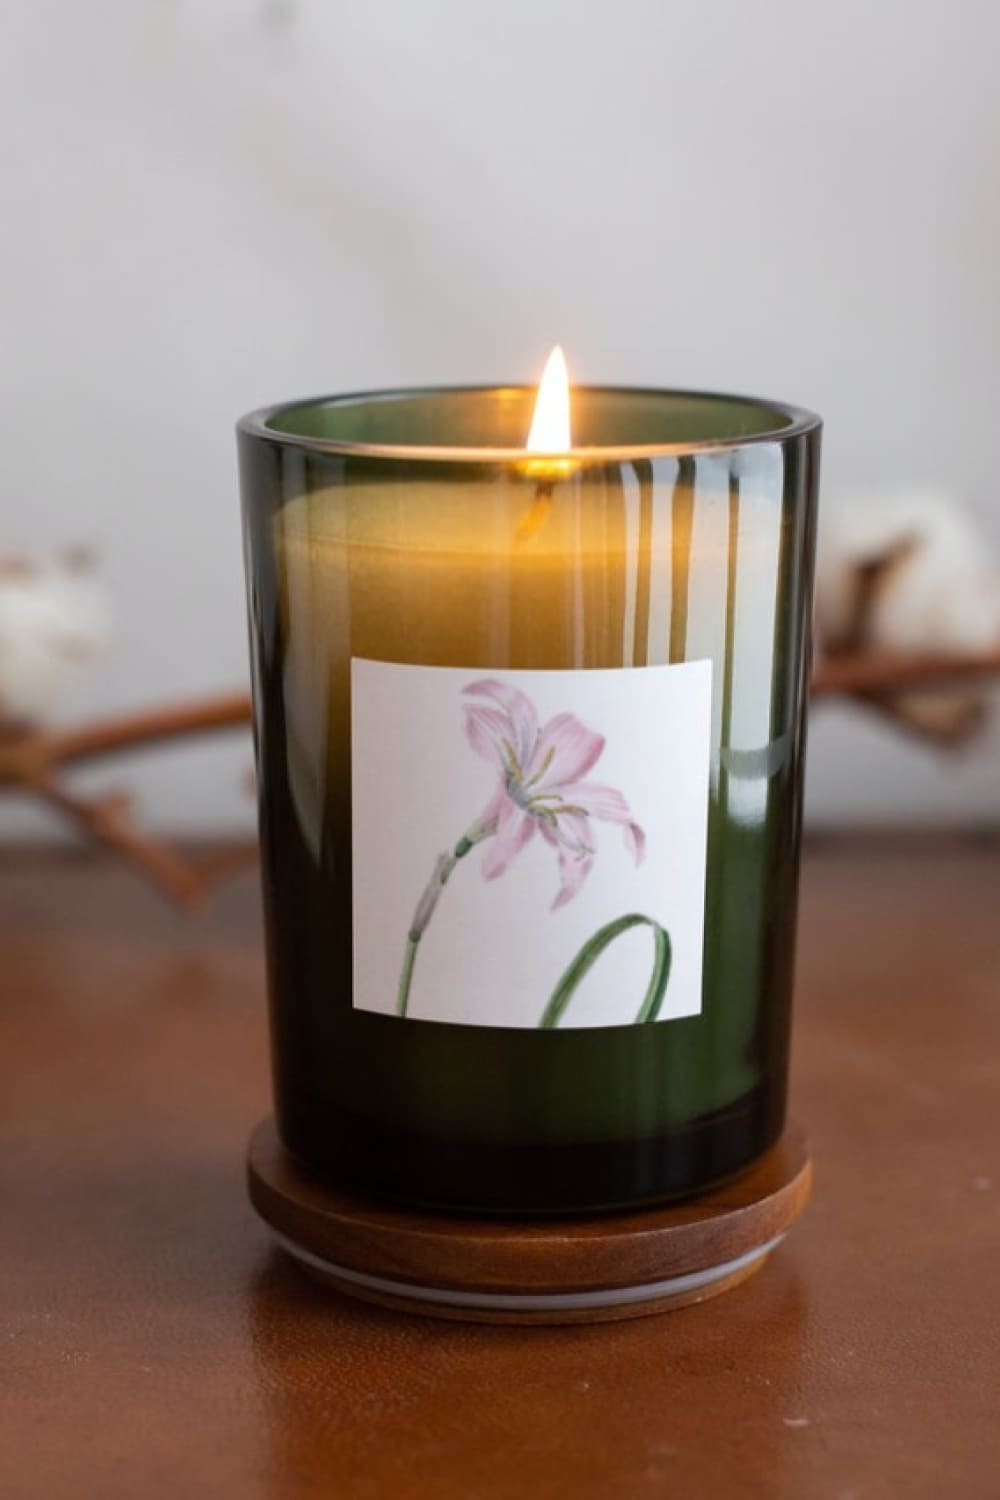 Beautiful themed candle for your home decor.